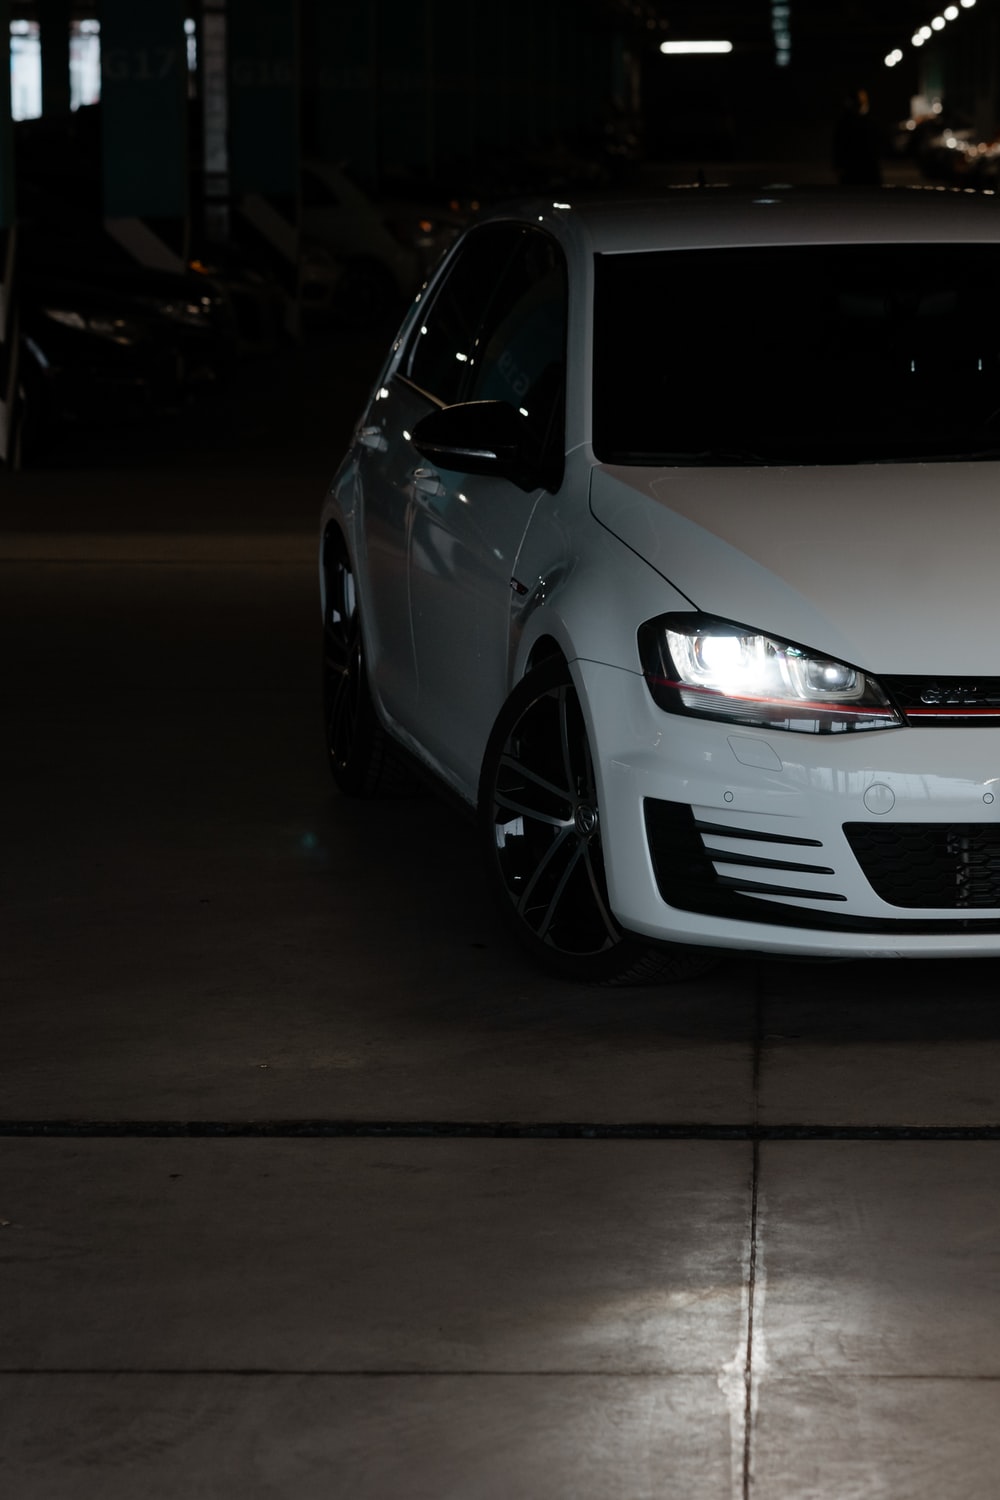 Vw Golf Pictures Image